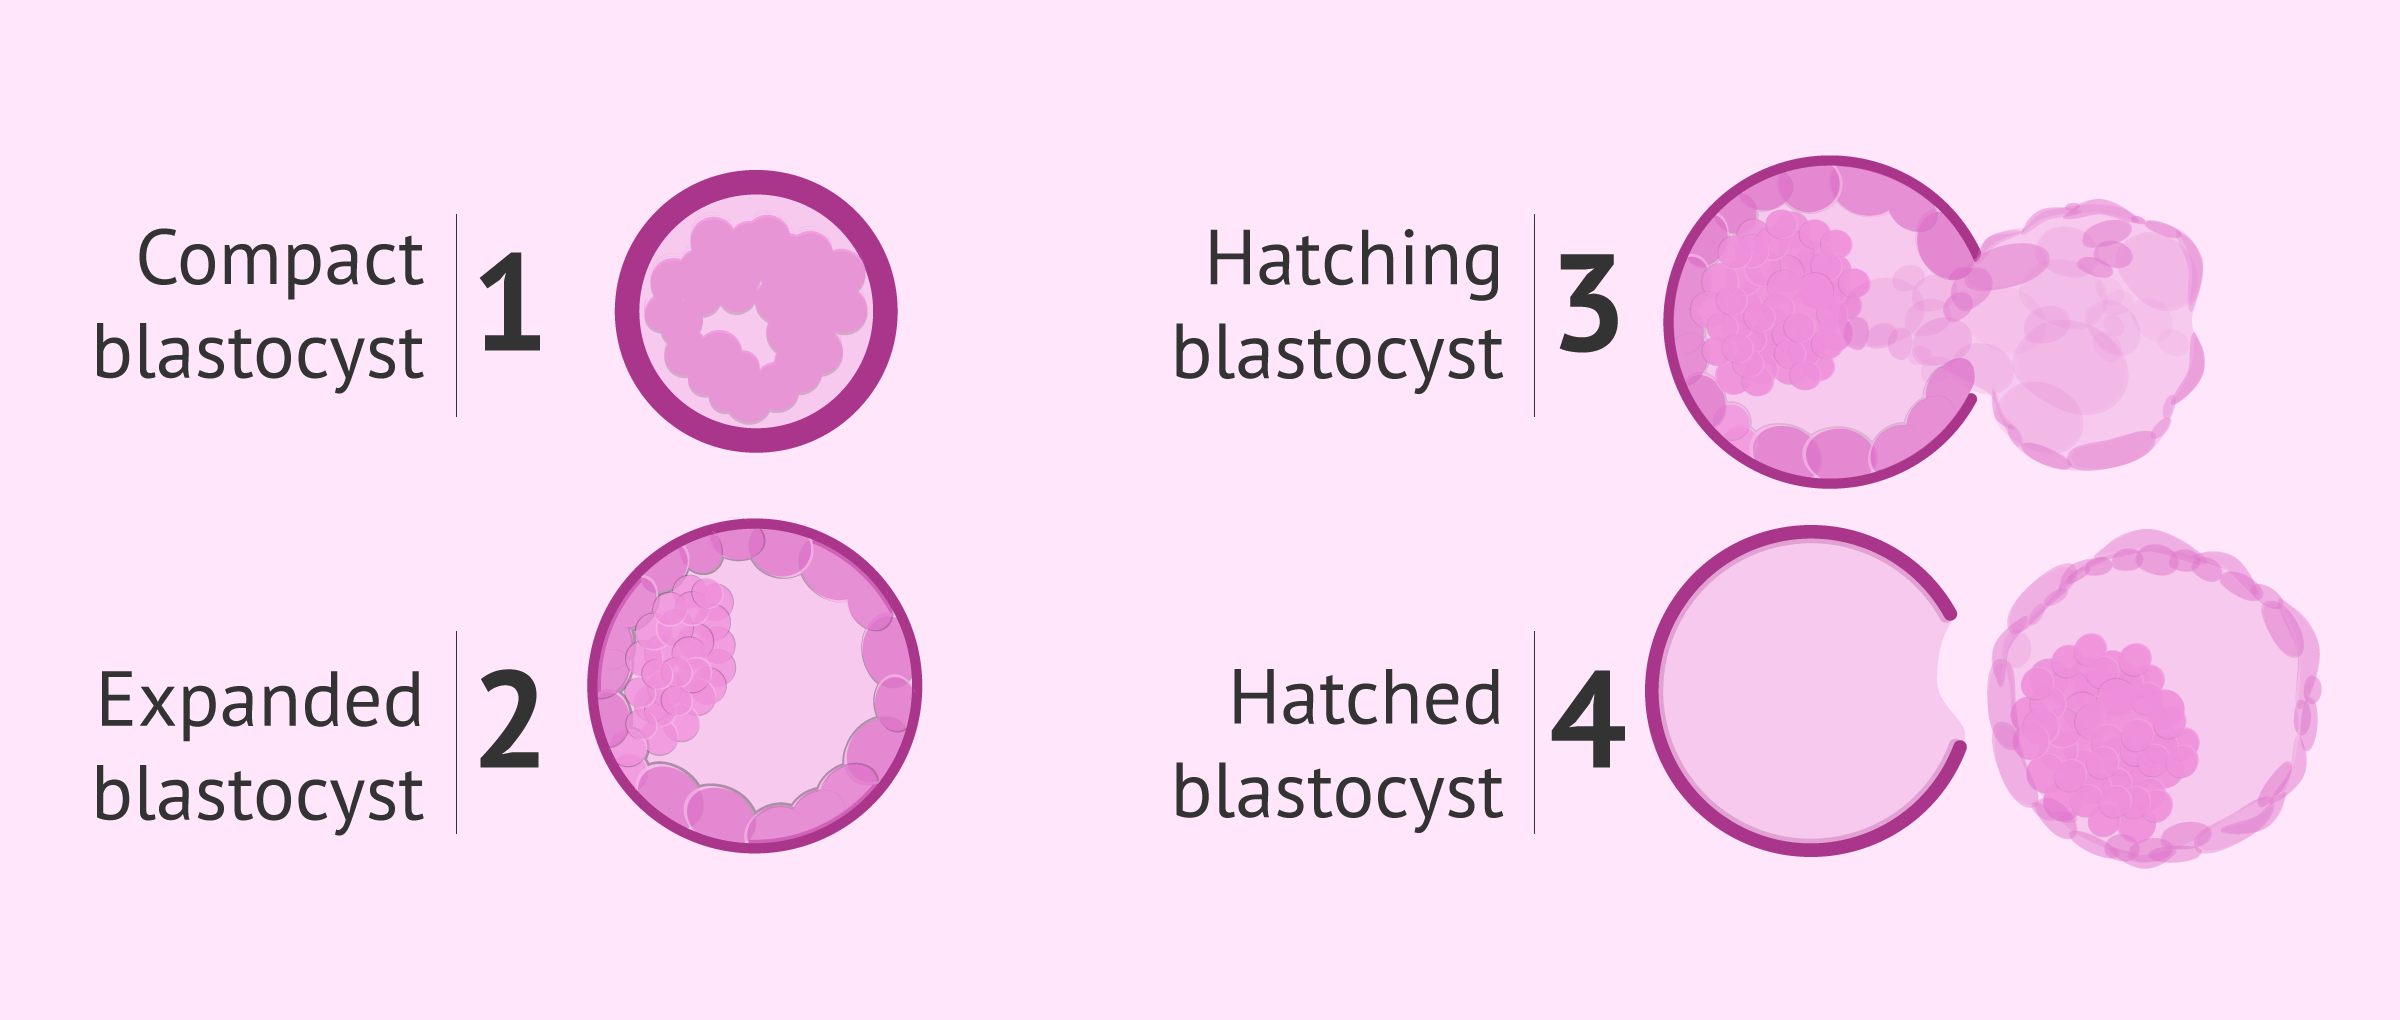 Development and hatching of the blastocyst